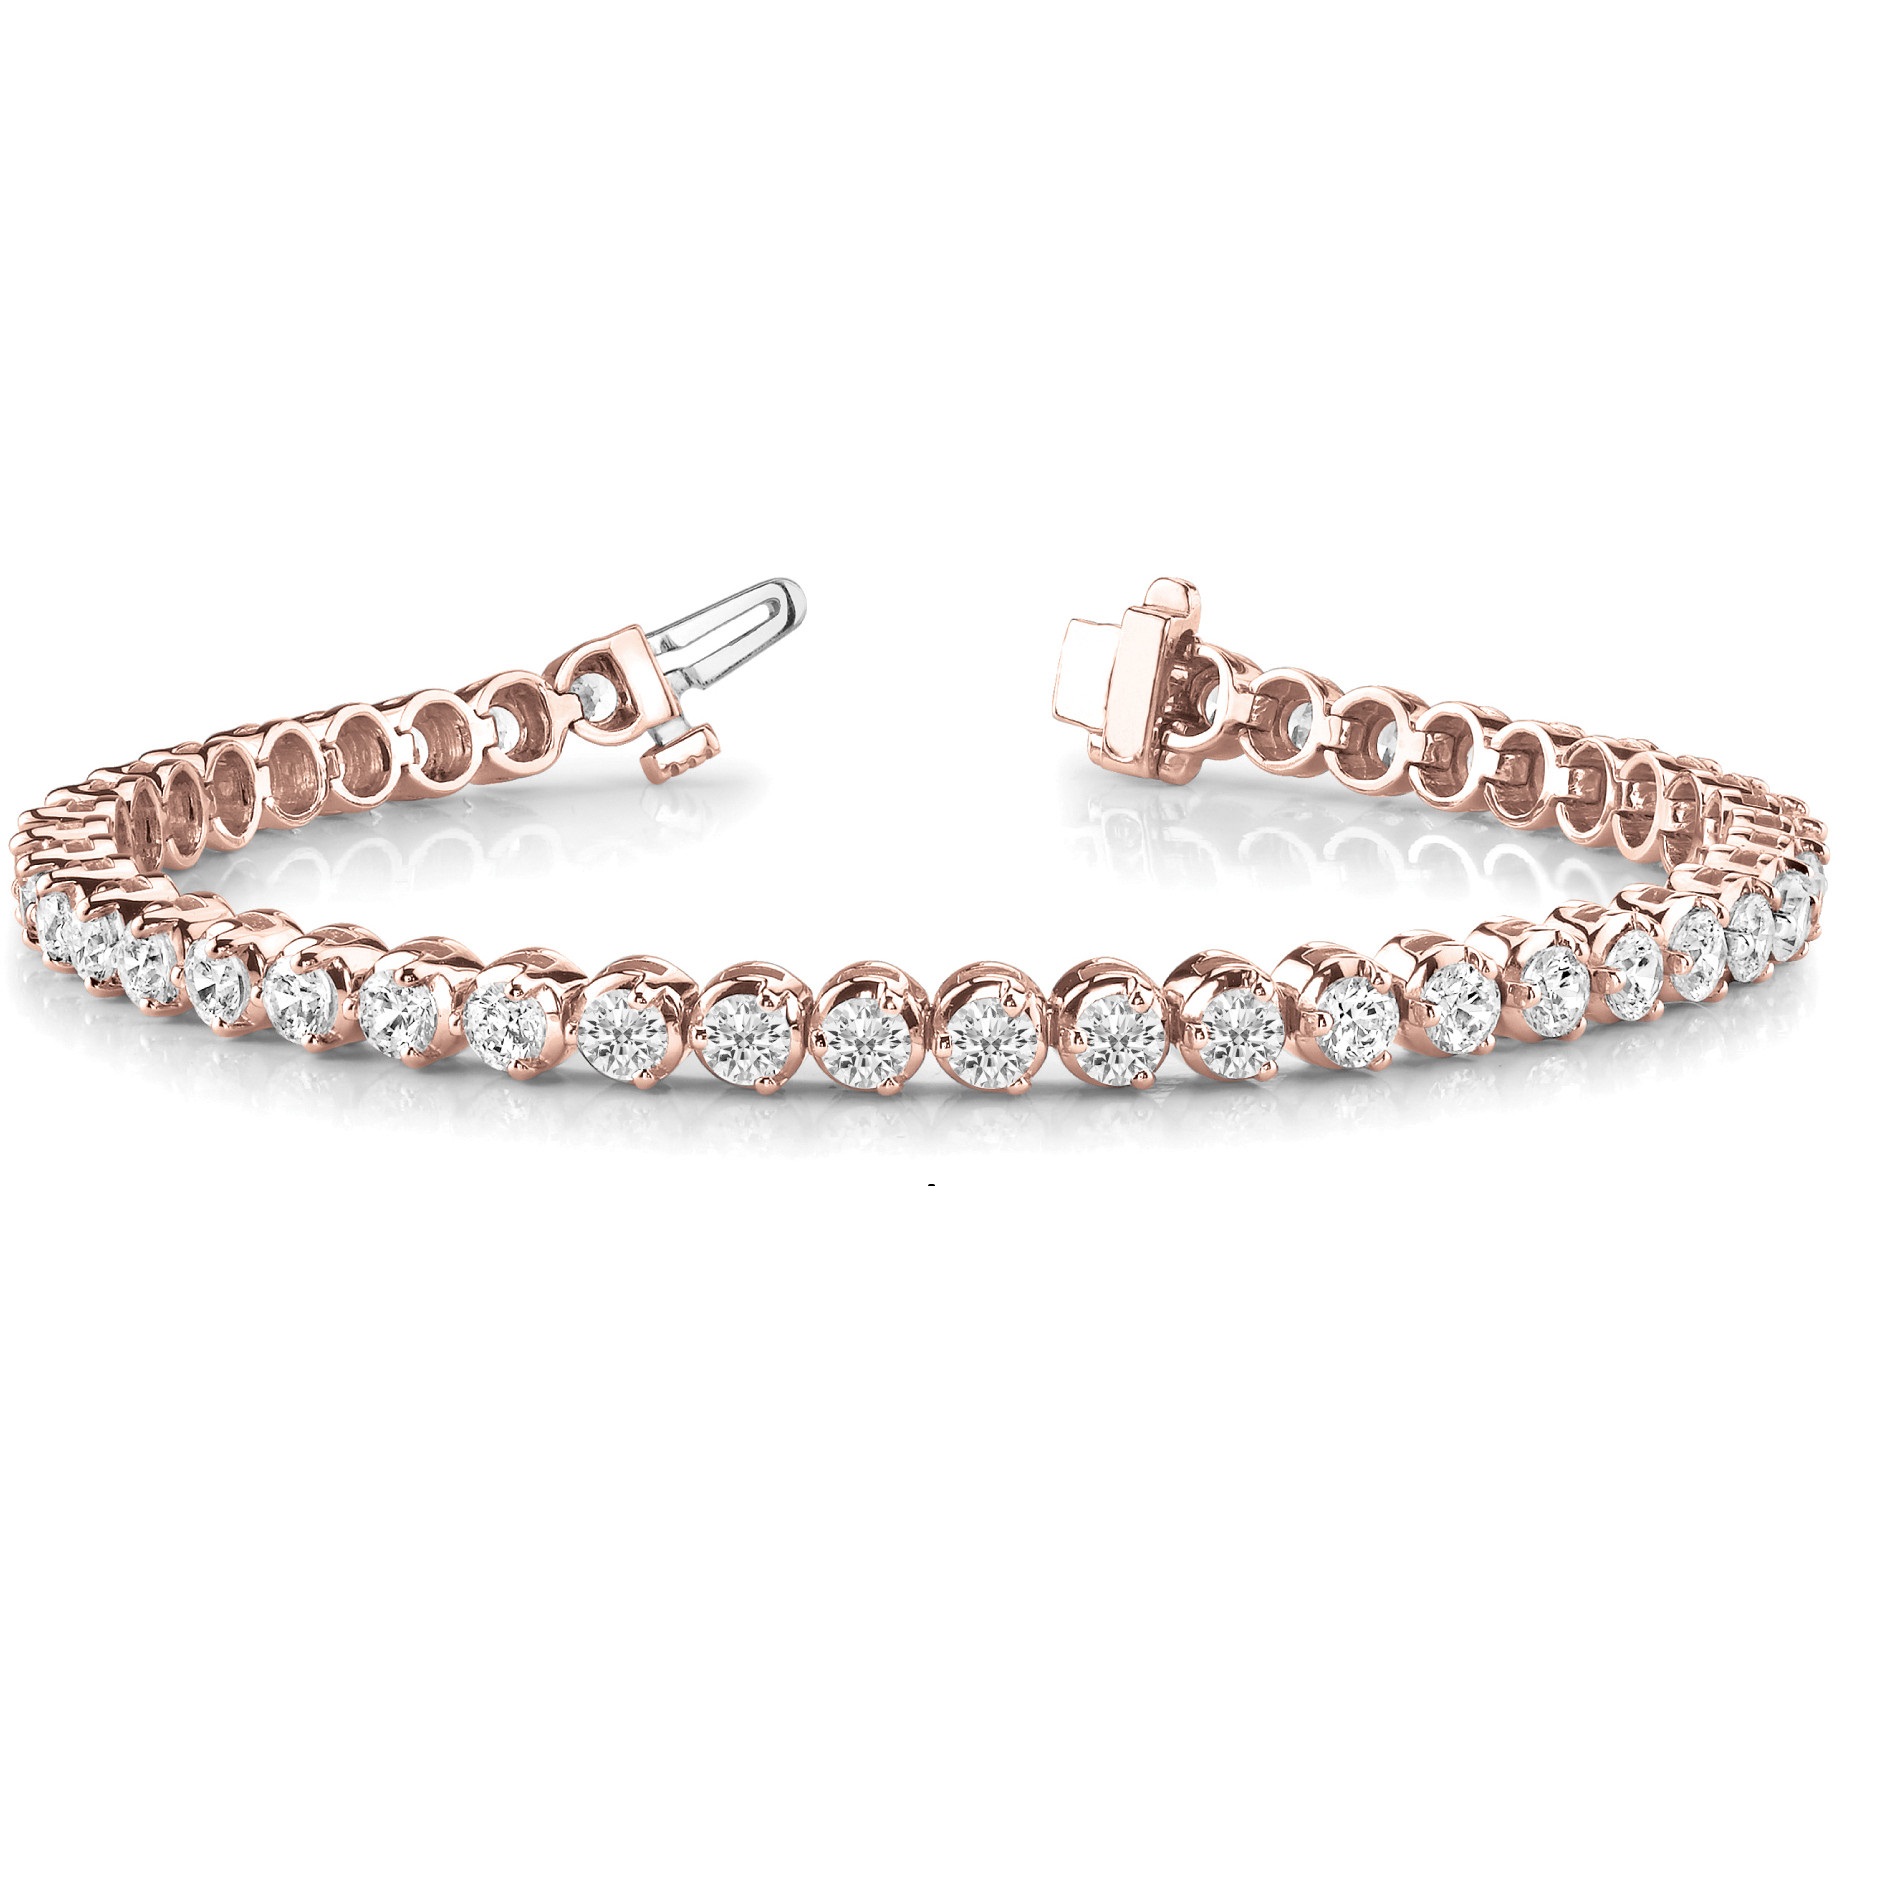 How to Tell if a Diamond Tennis Bracelet Is Real